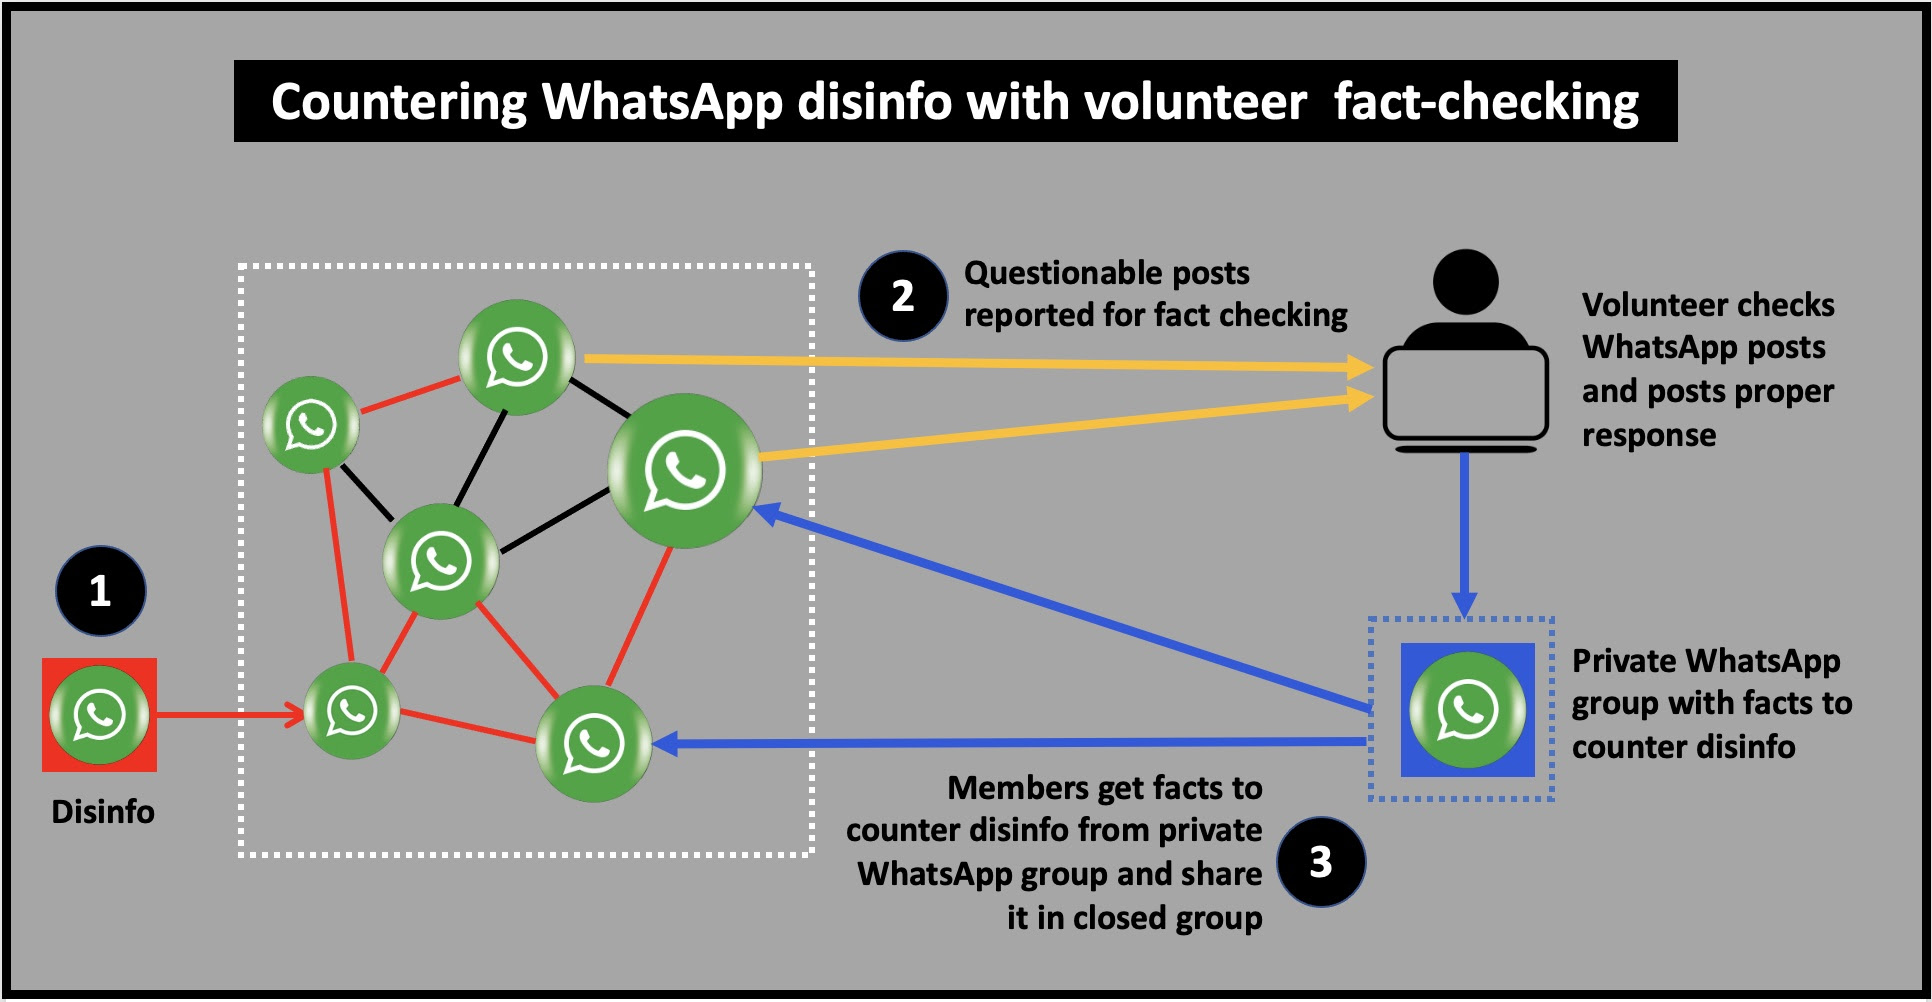 Counter disinfo being spread on WhatsApp with volunteer fact checking